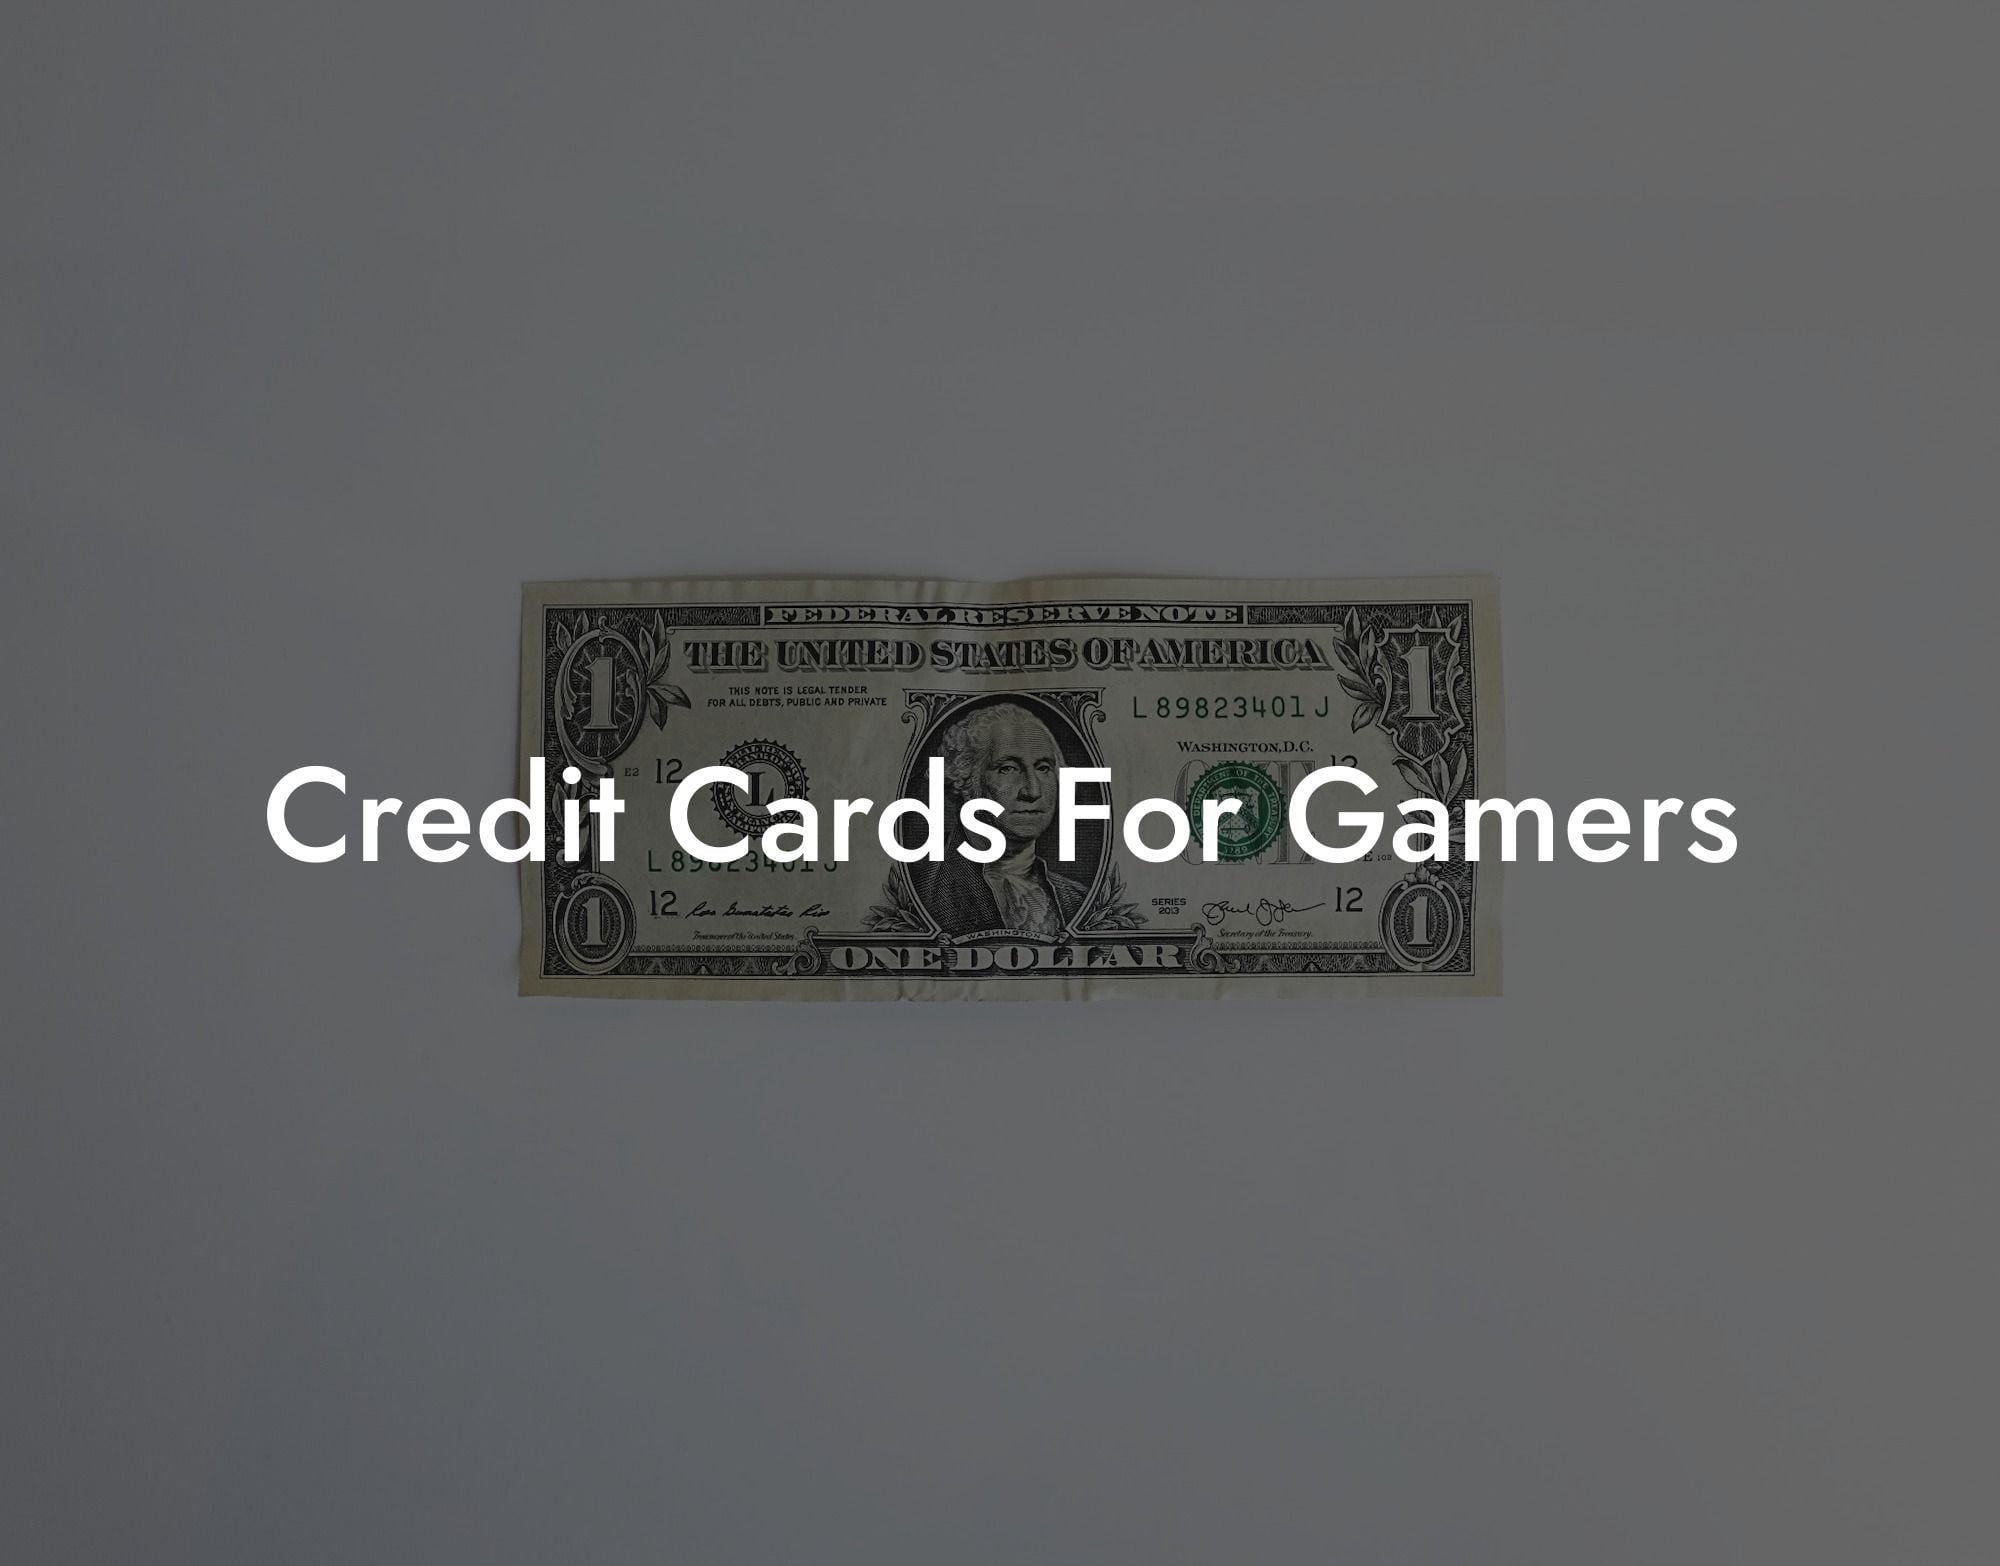 Credit Cards For Gamers